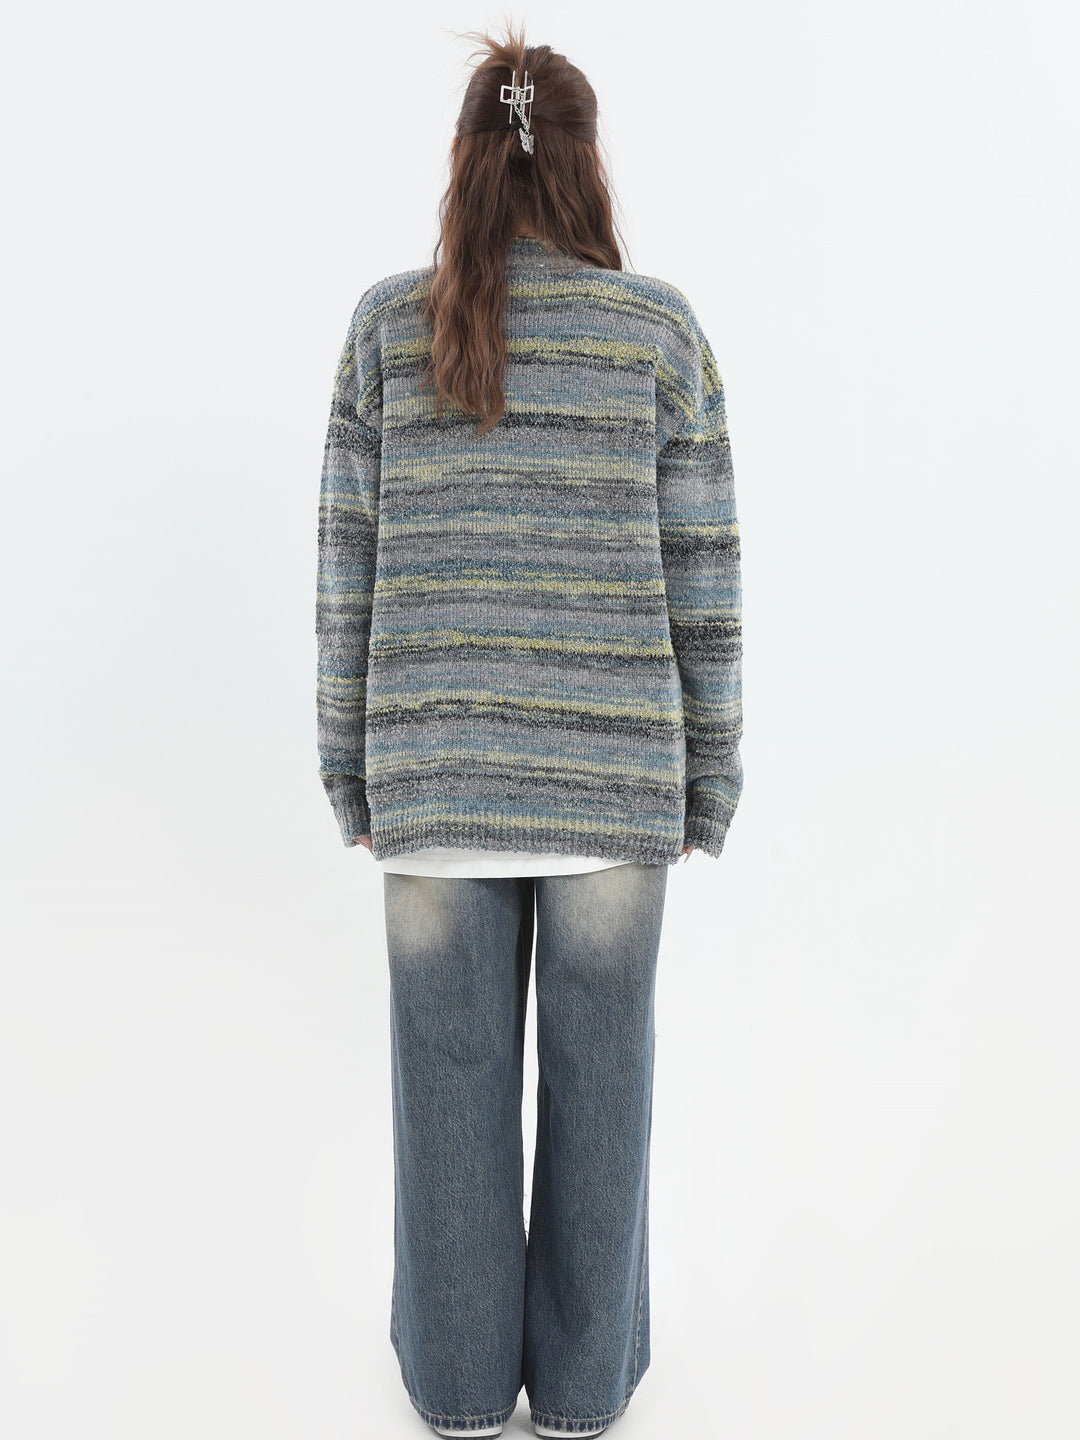 [INSstudios] 페인팅 color loose knit sweater na821